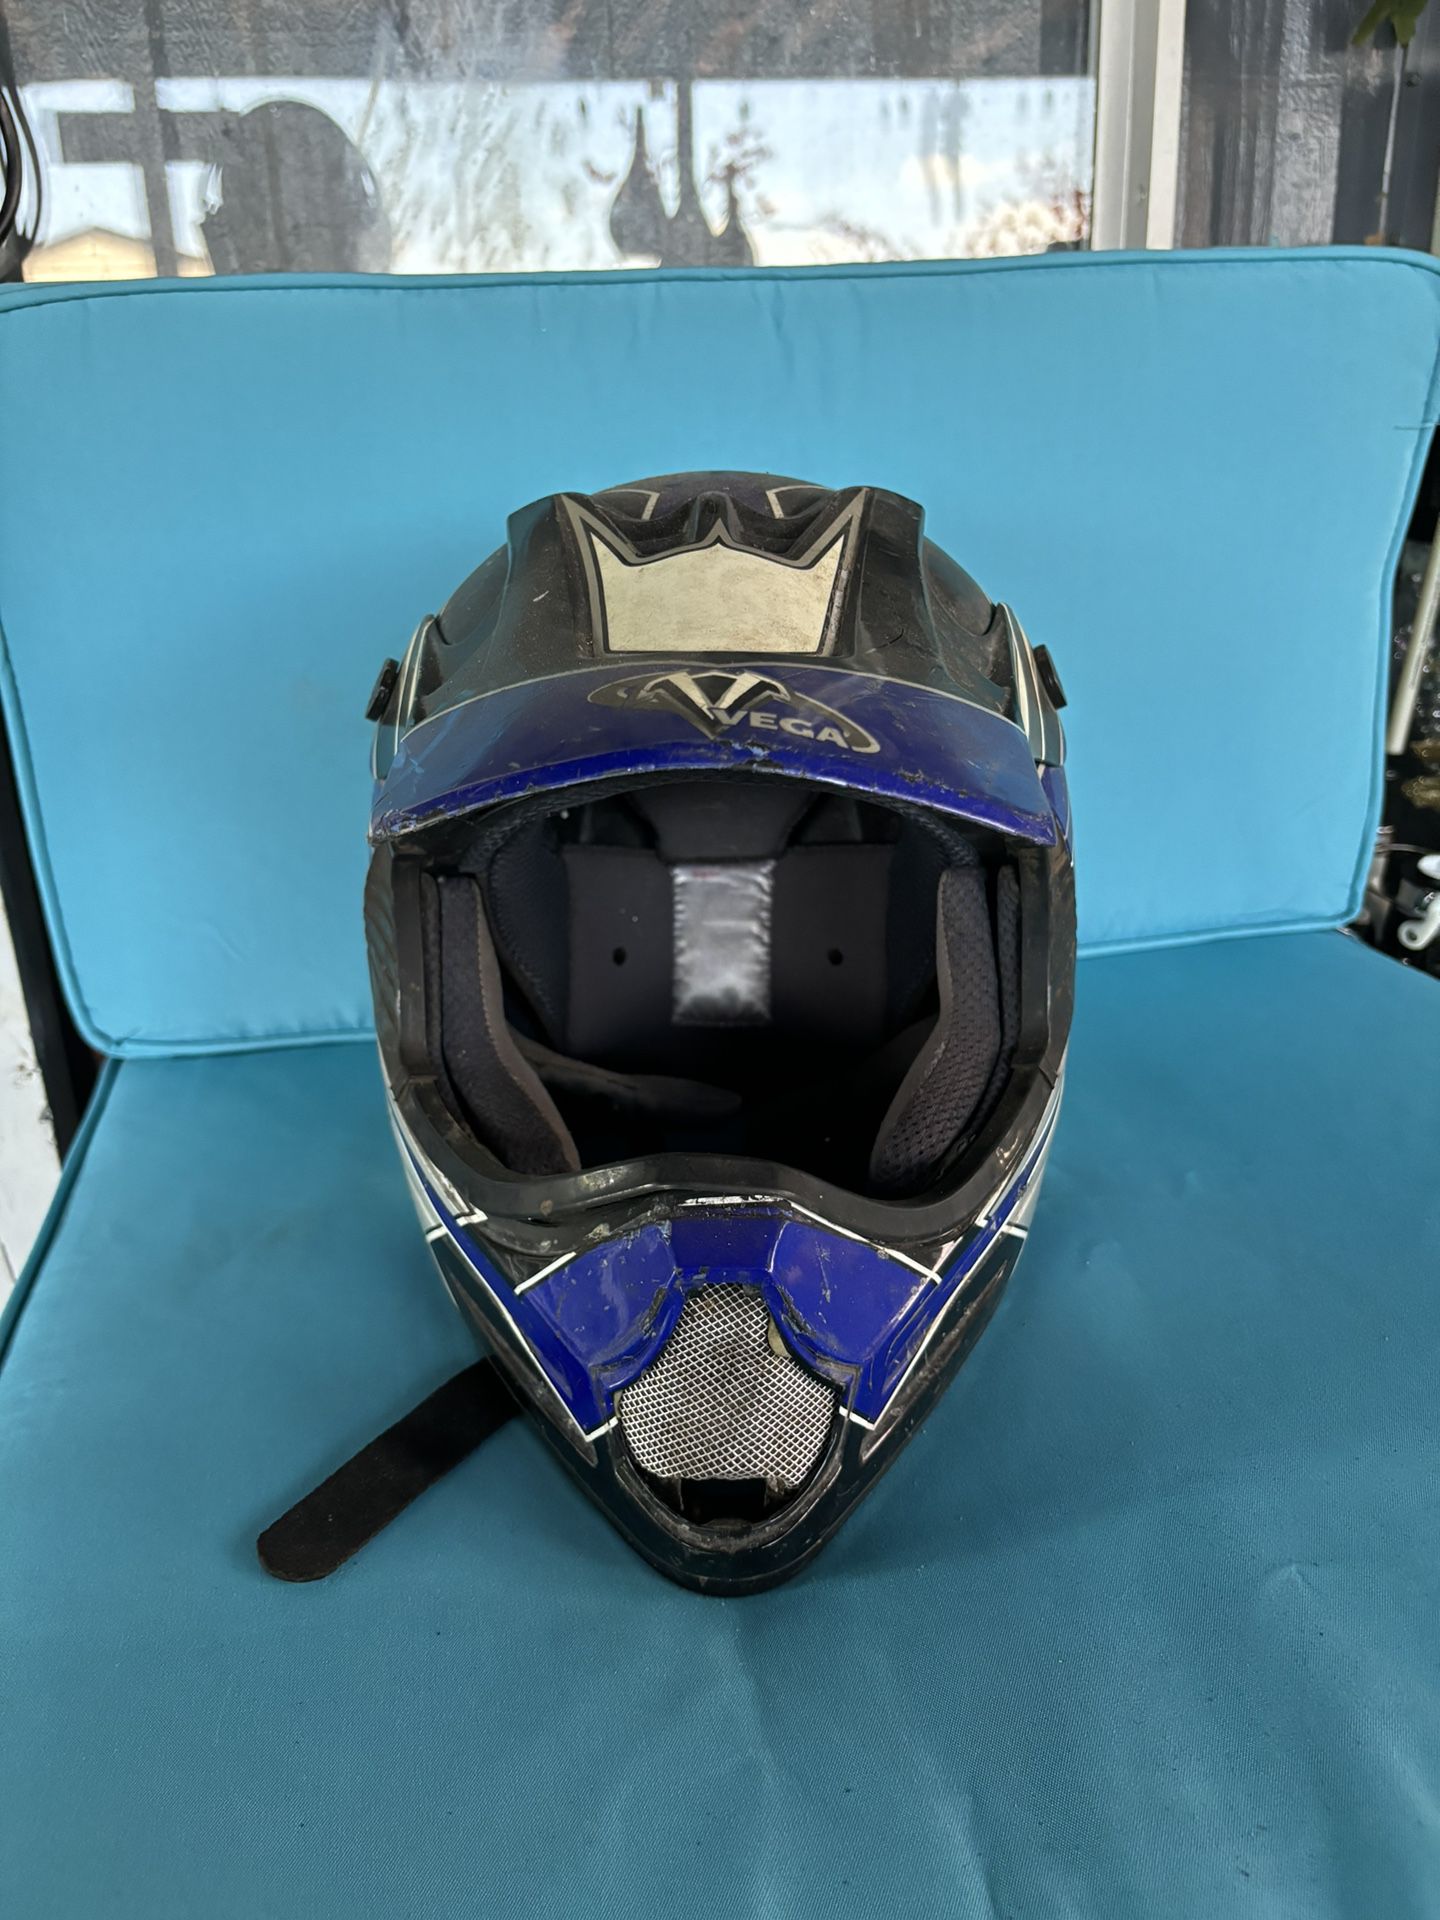 Brand:Vega Helmets - SIZE:Large - COLOR:Blue With black And White